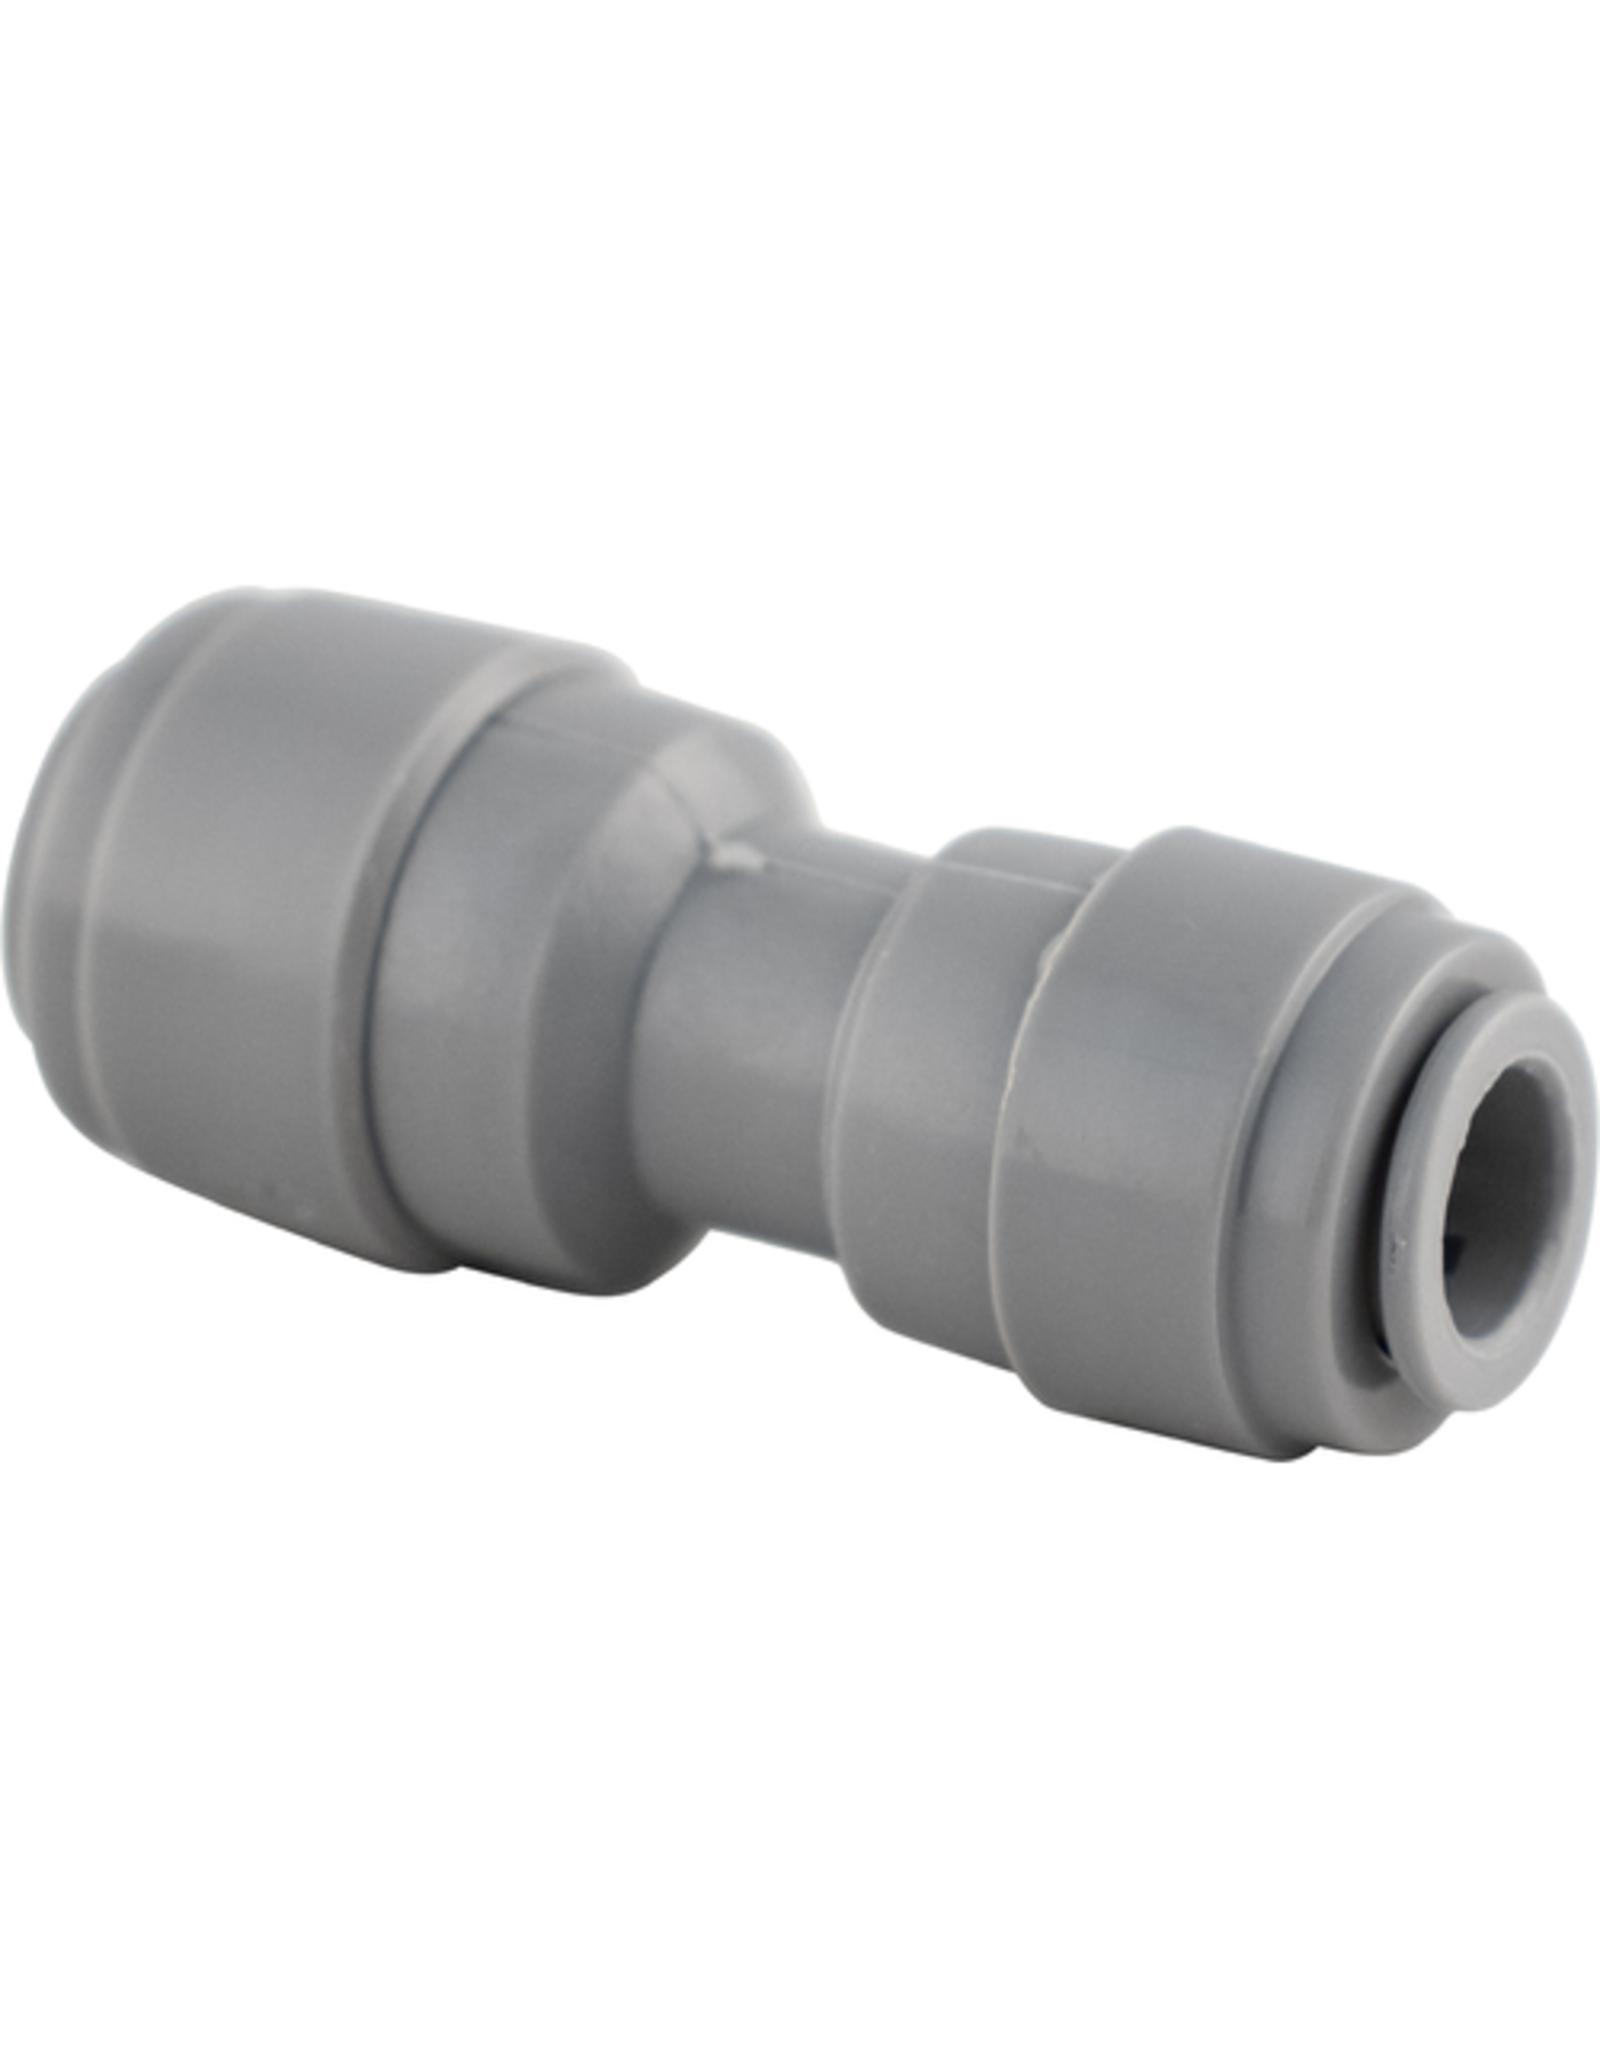 KegLand Duotight Push-In Fitting - 8 mm (5/16 in.) x 9.5 mm (3/8 in.) Reducer